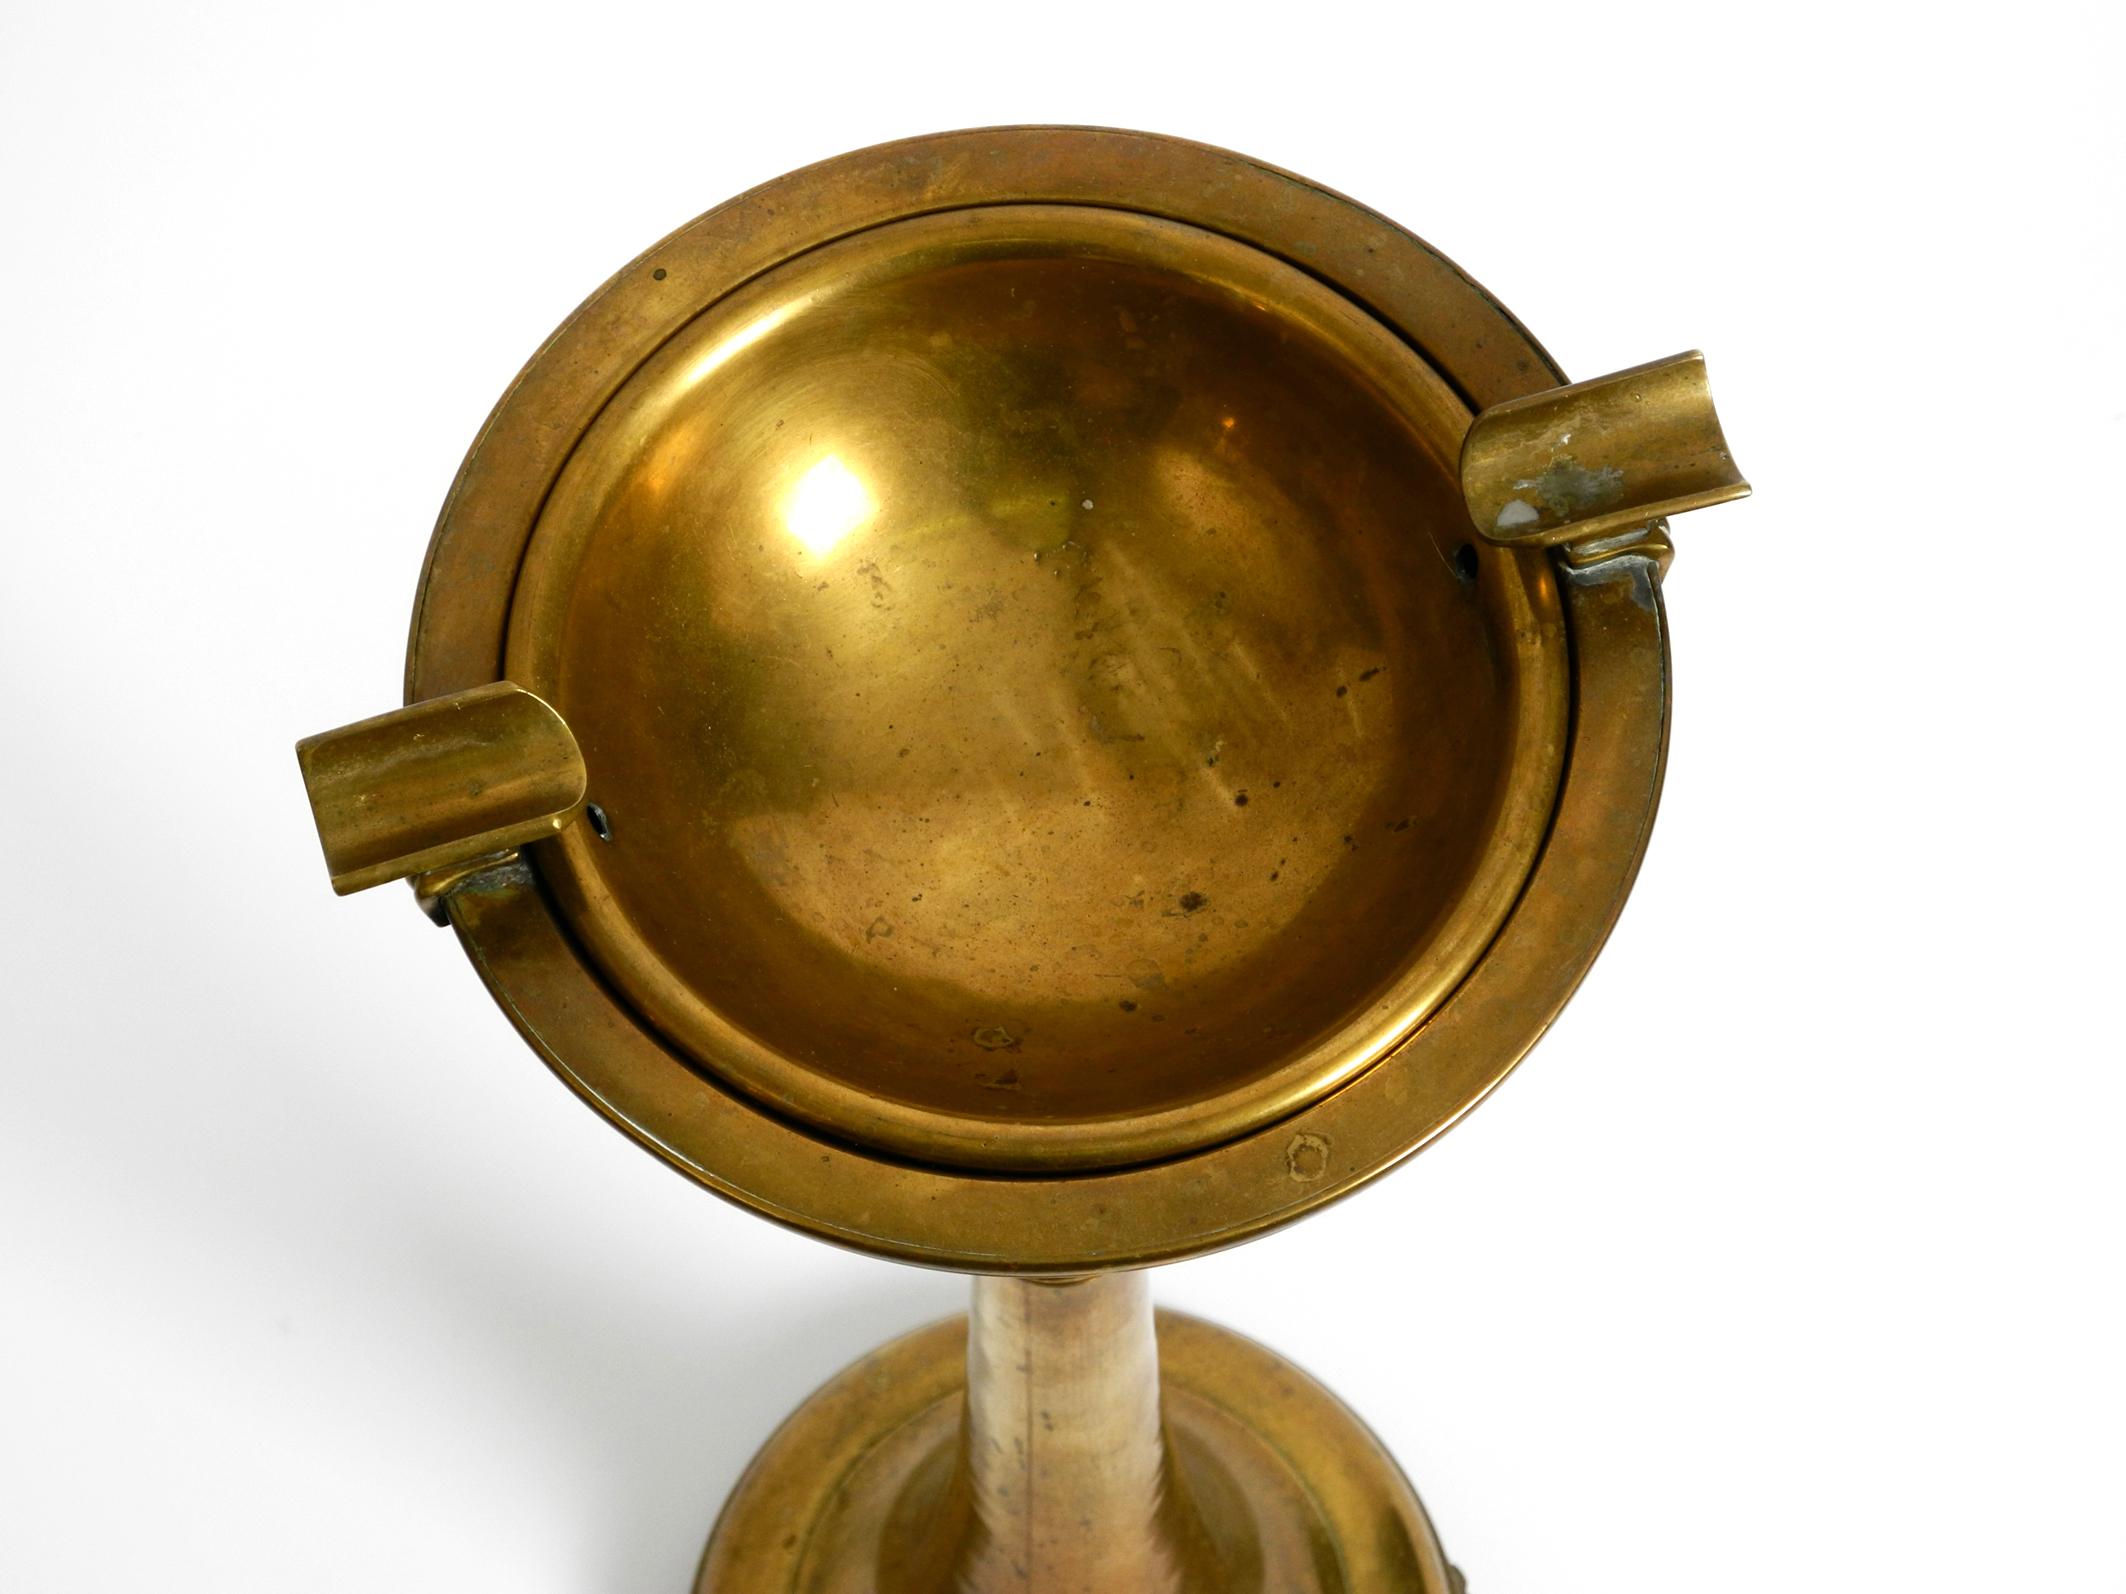 German Beautiful, Large, Heavy Art Nouveau Brass Standing Ashtray from Around 1900